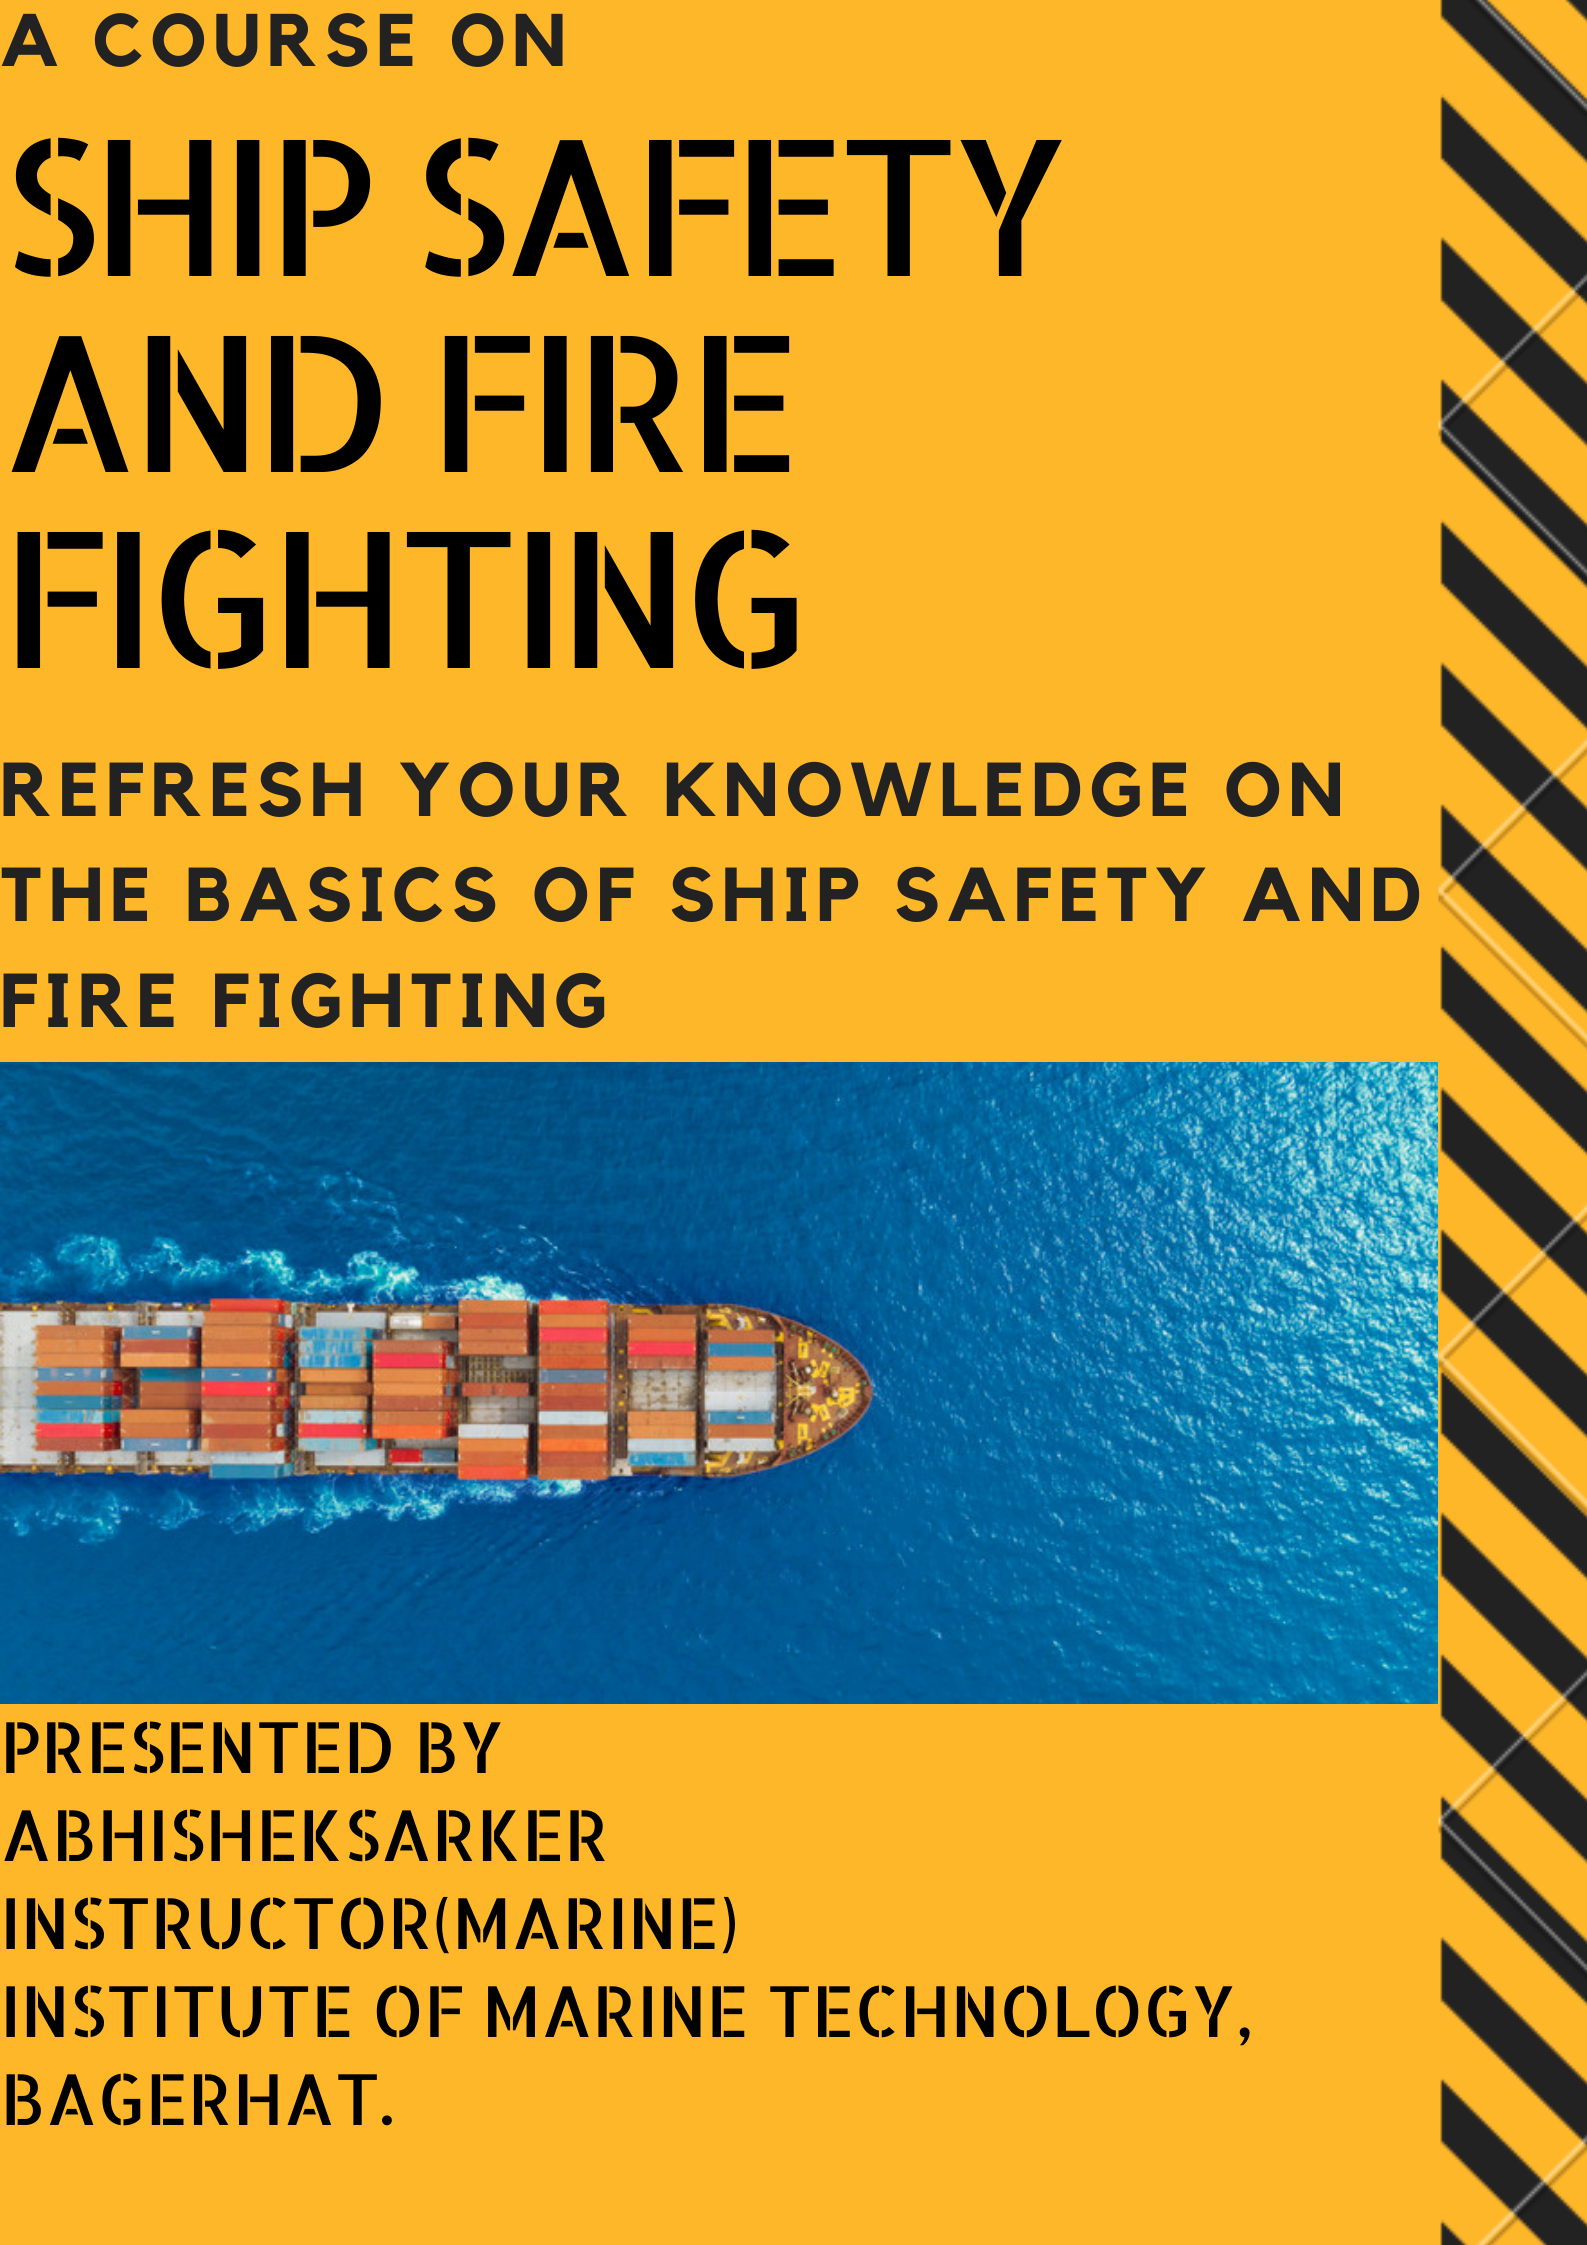 Course Image SHIP SAFETY AND FIRE FIGHTING